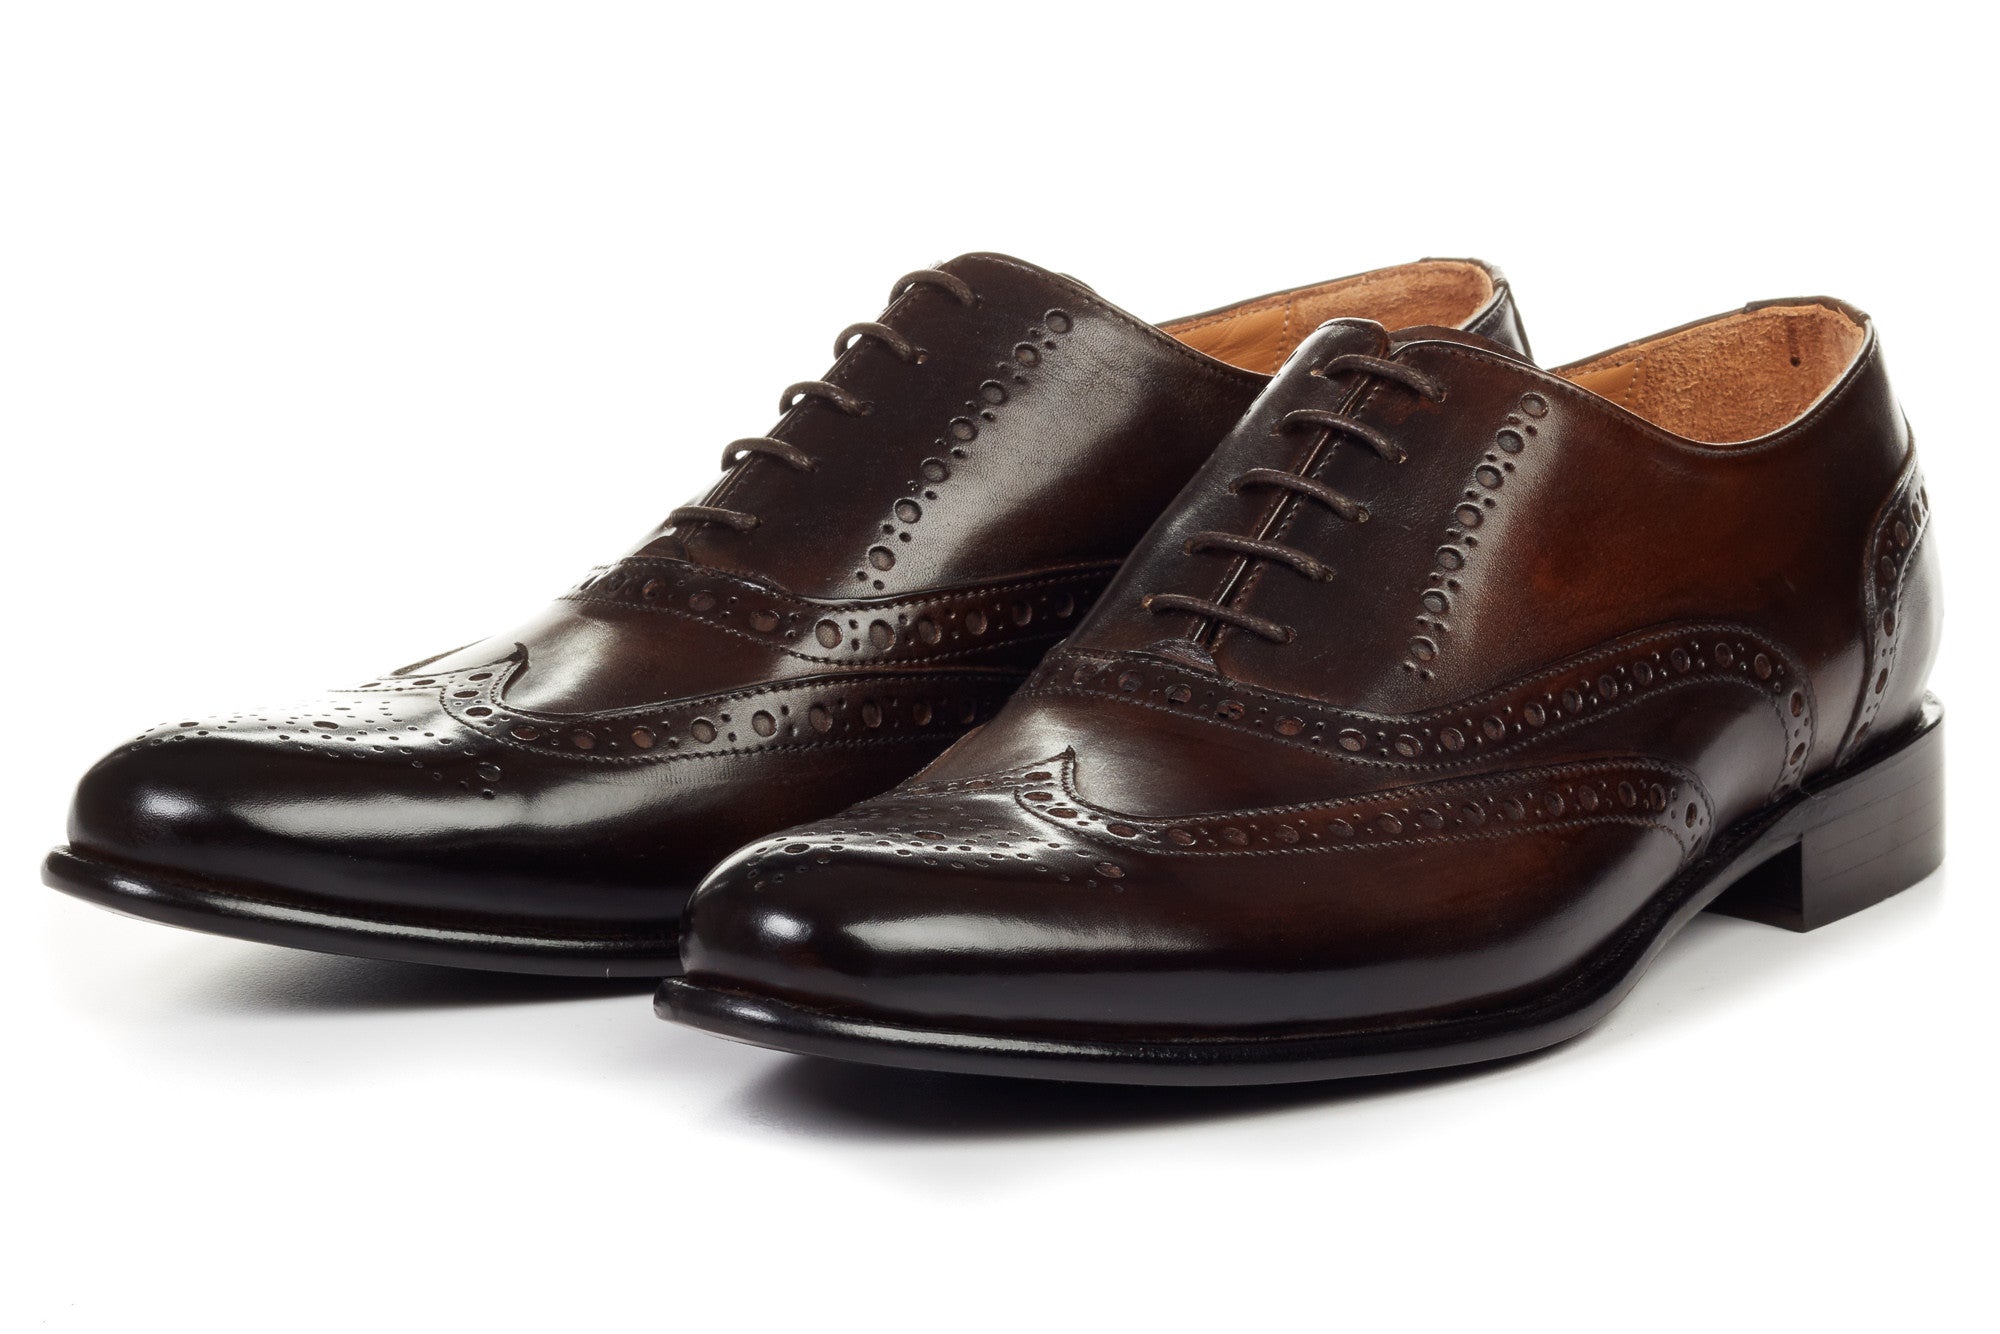 The West II Wingtip Oxford - Chocolate